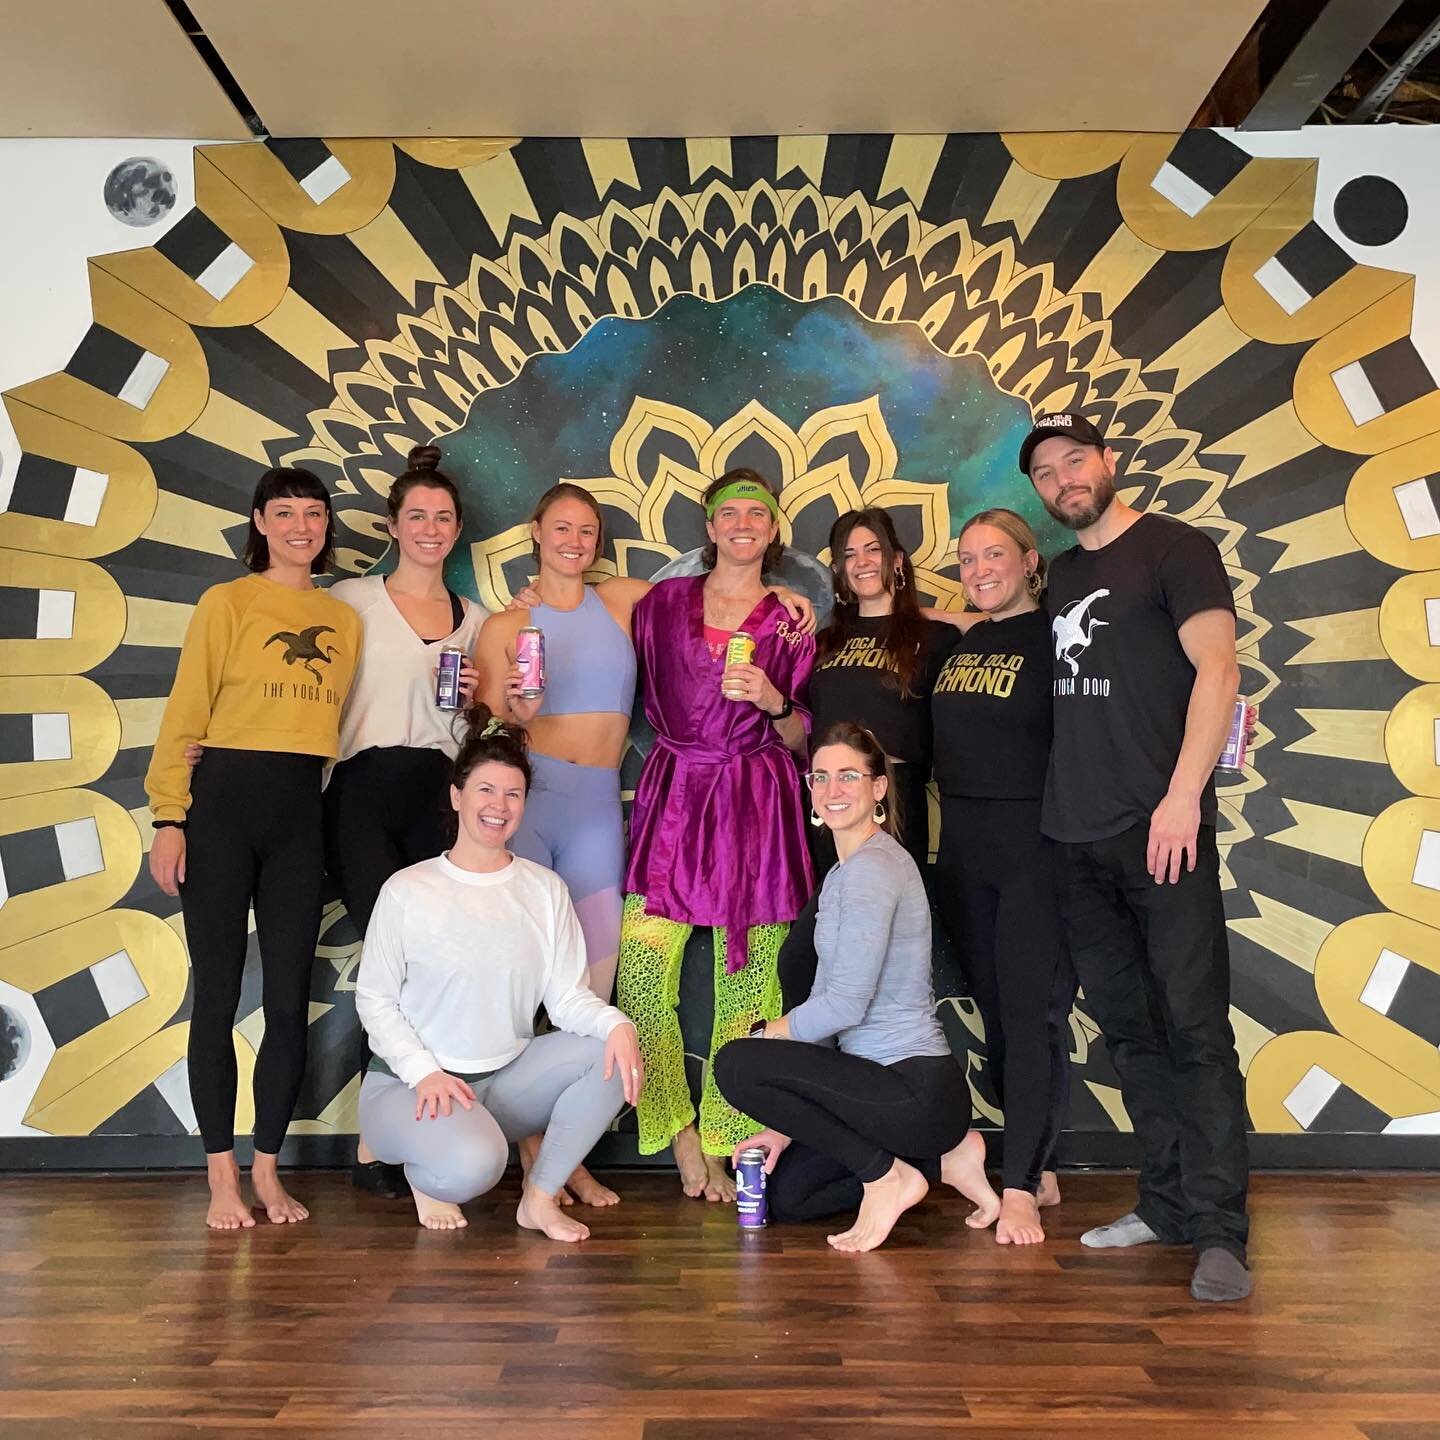 Huge congrats to @flowwithlo and @adrian_mccavitt on opening their massive new location for @theyogadojo! What was already the best yoga studio in the known universe is going next level in their new spot. @swamimosa was invited to Richmond, VA in Dec